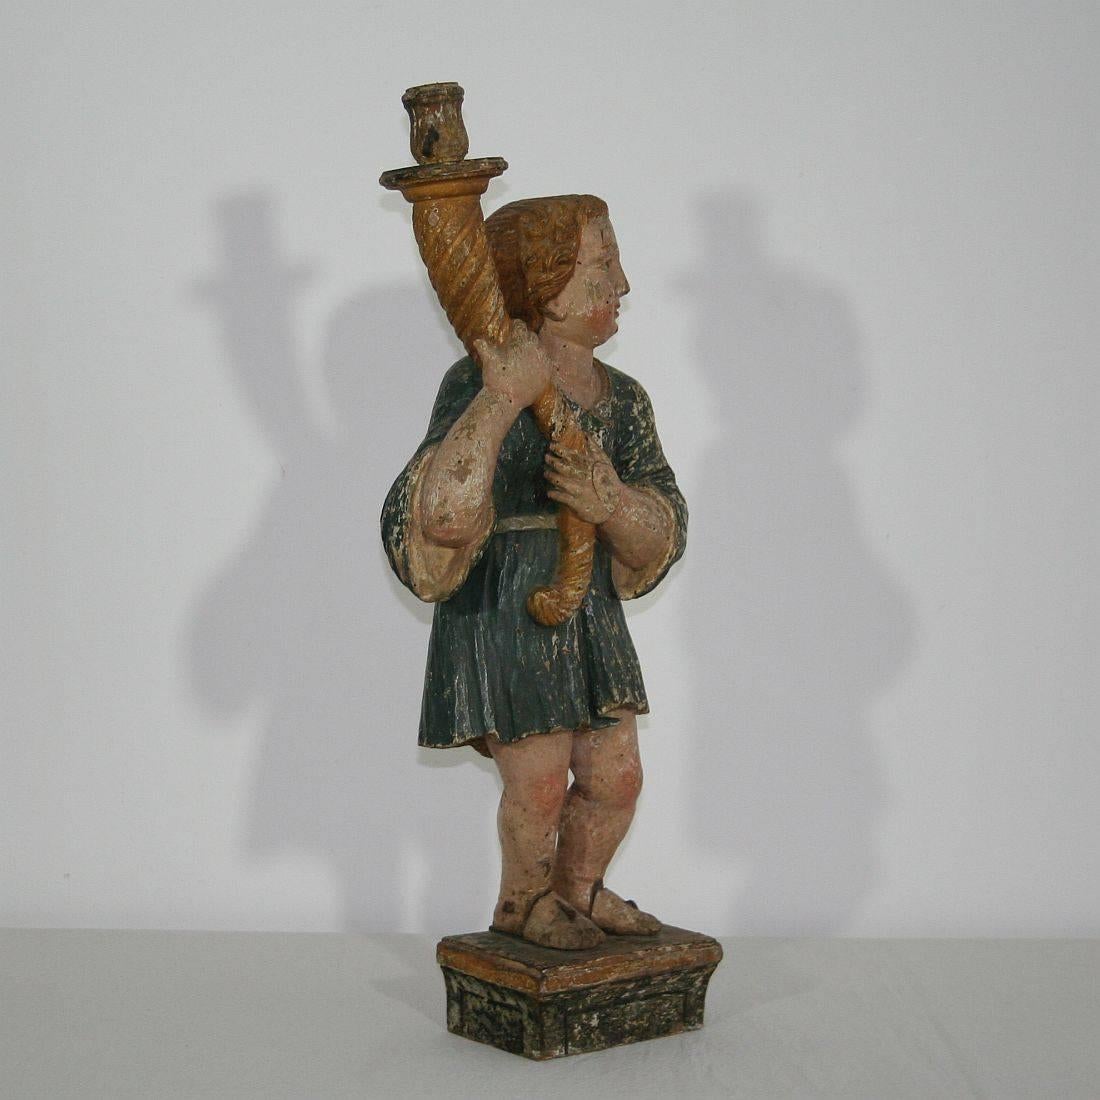 European 17th Century, Early Baroque Carved Wooden Angel with a Candleholder